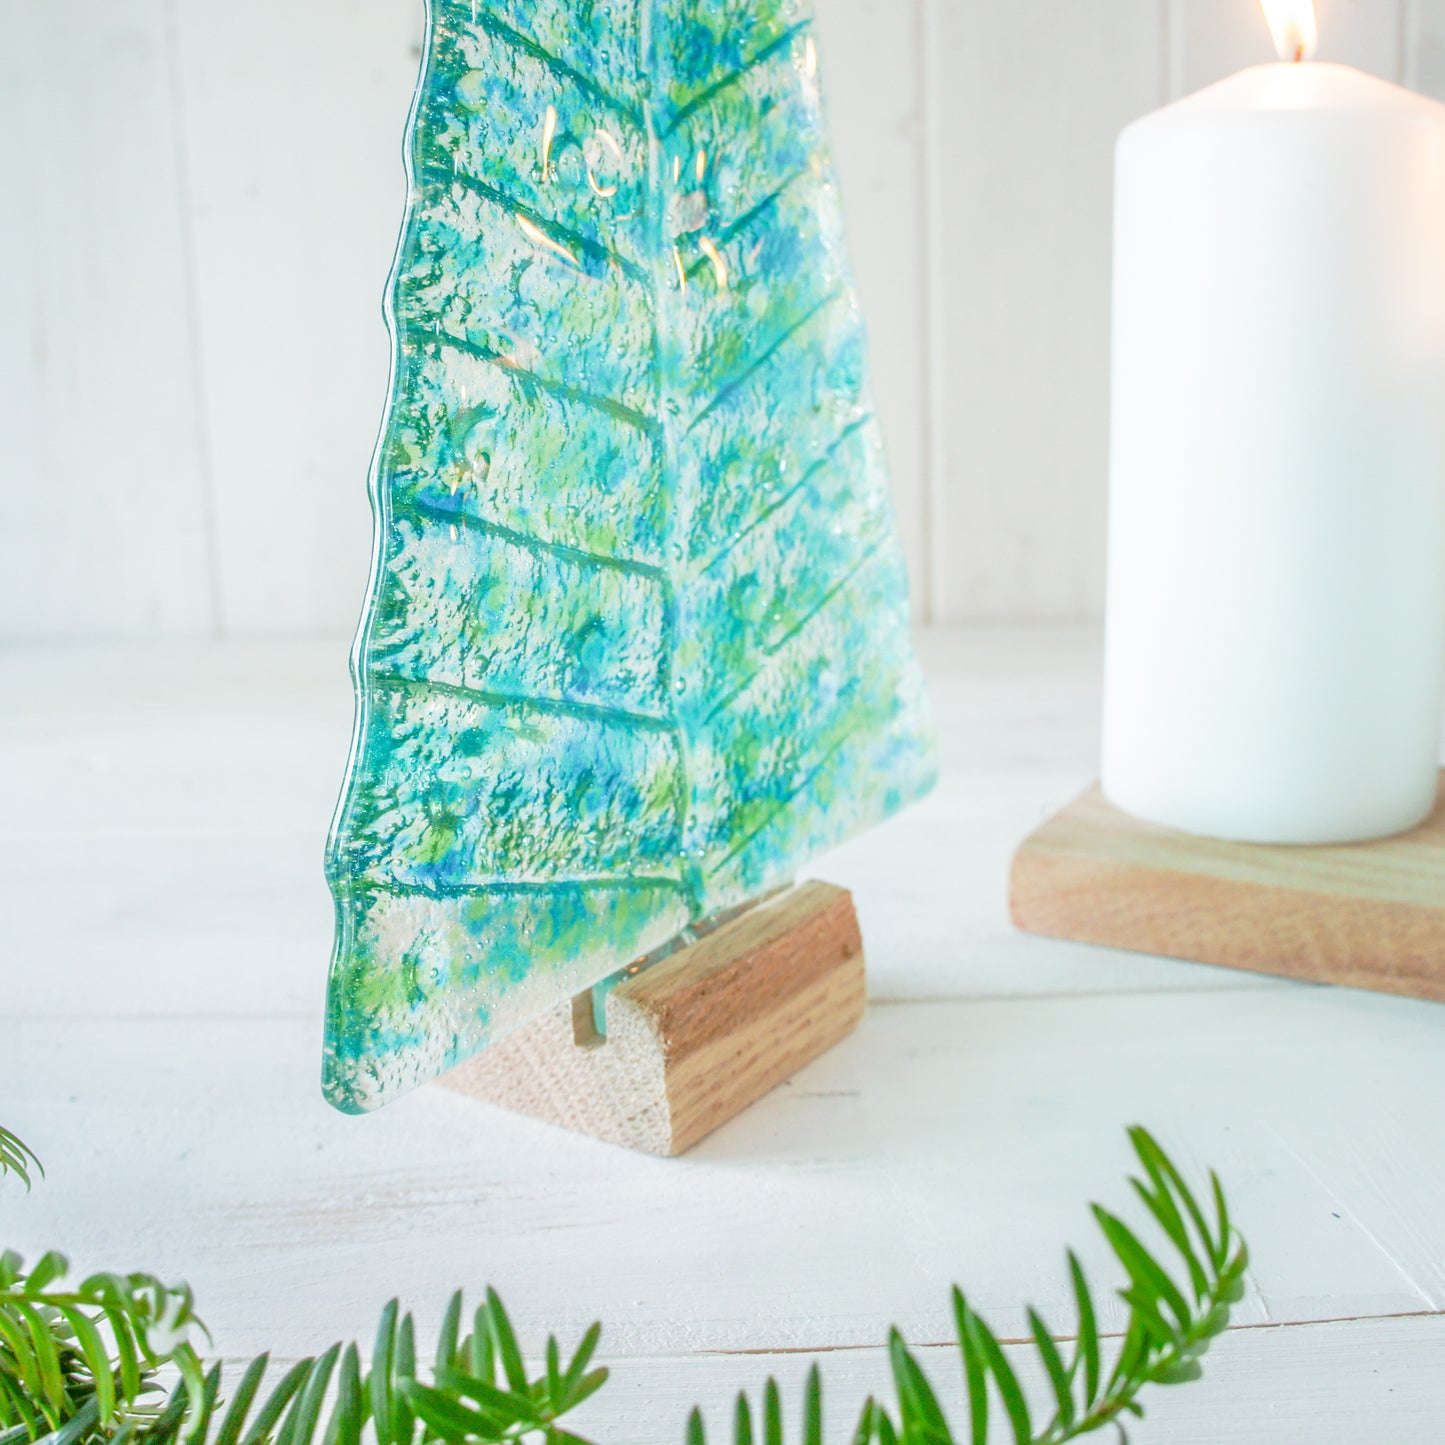 XL Lime Green&Blue Glass Christmas Tree Decoraiton - Freestanding - 32cm/12 1/2" with wooden block